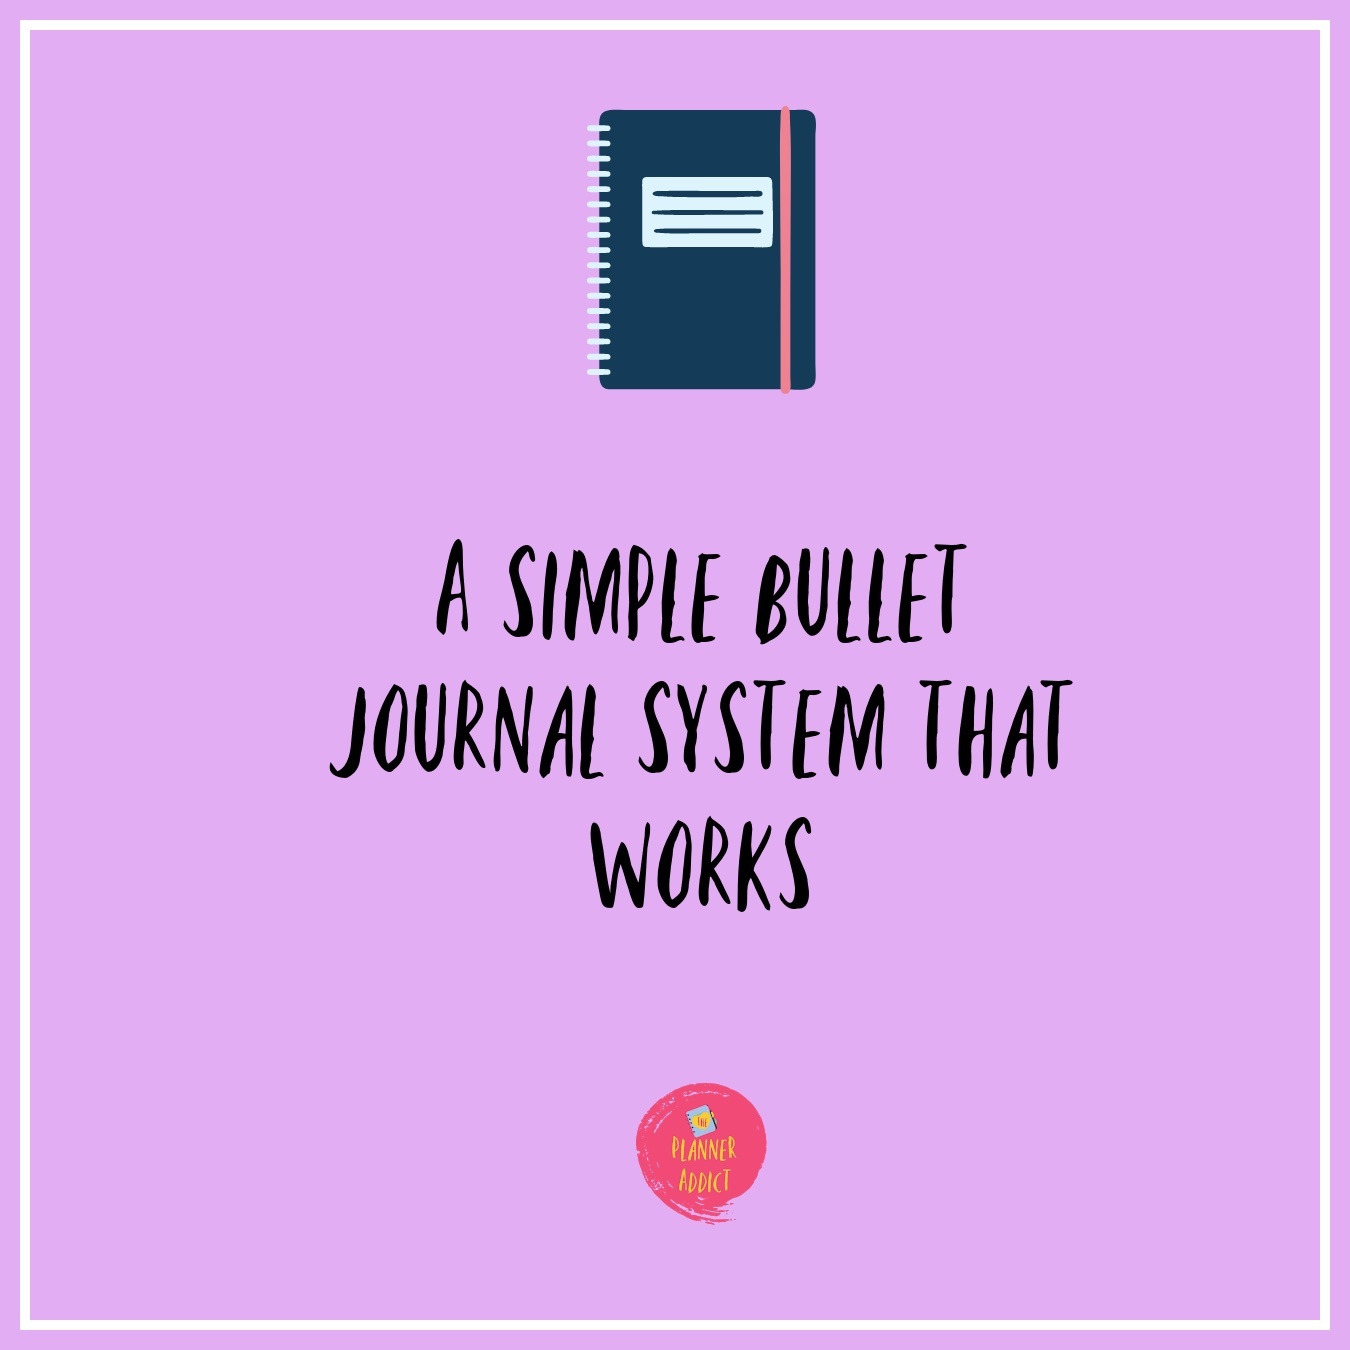 A simple Bullet Journal system that works.